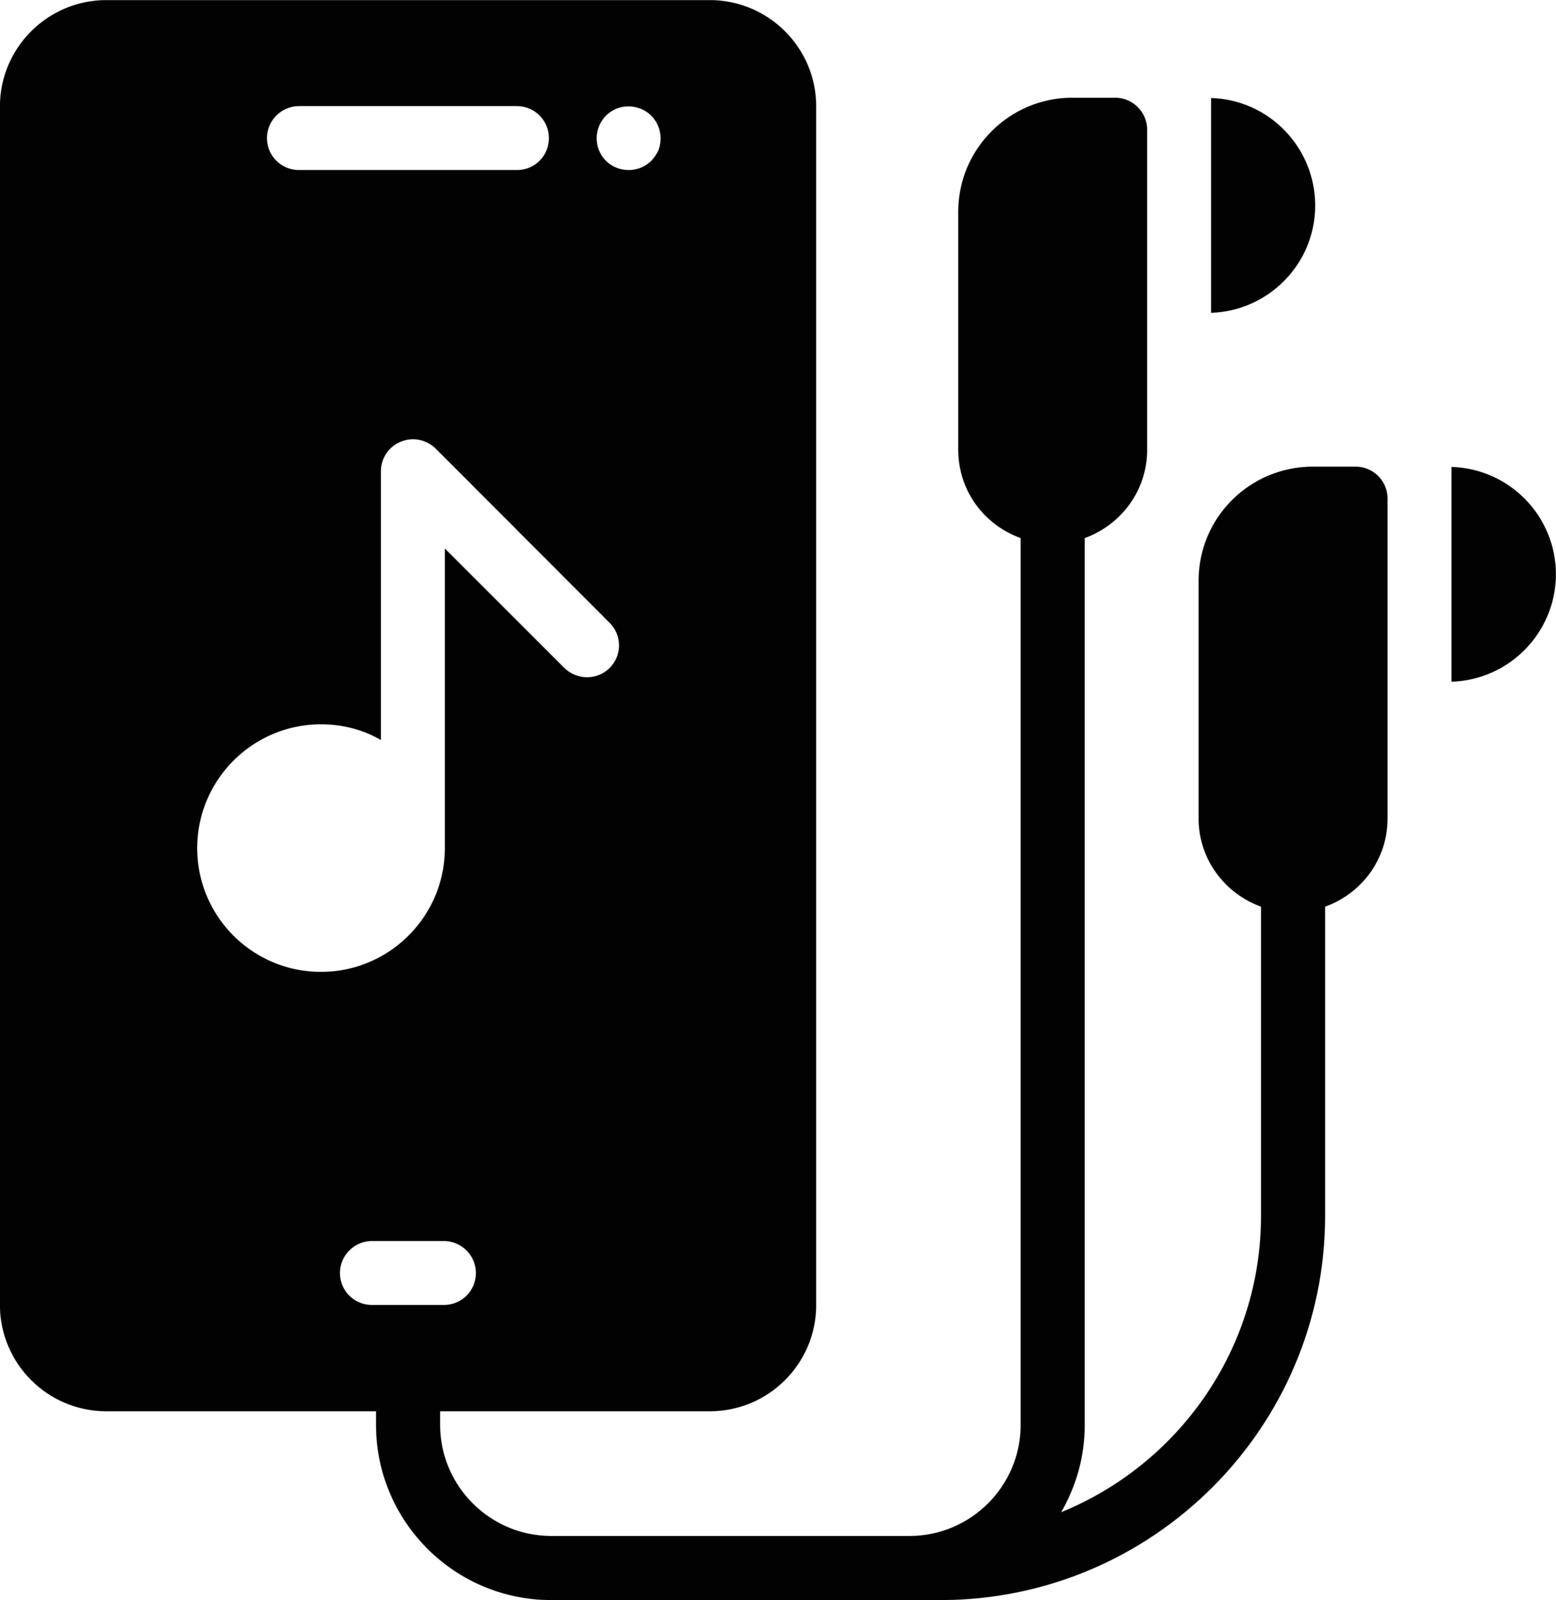 music player vector glyph flat icon